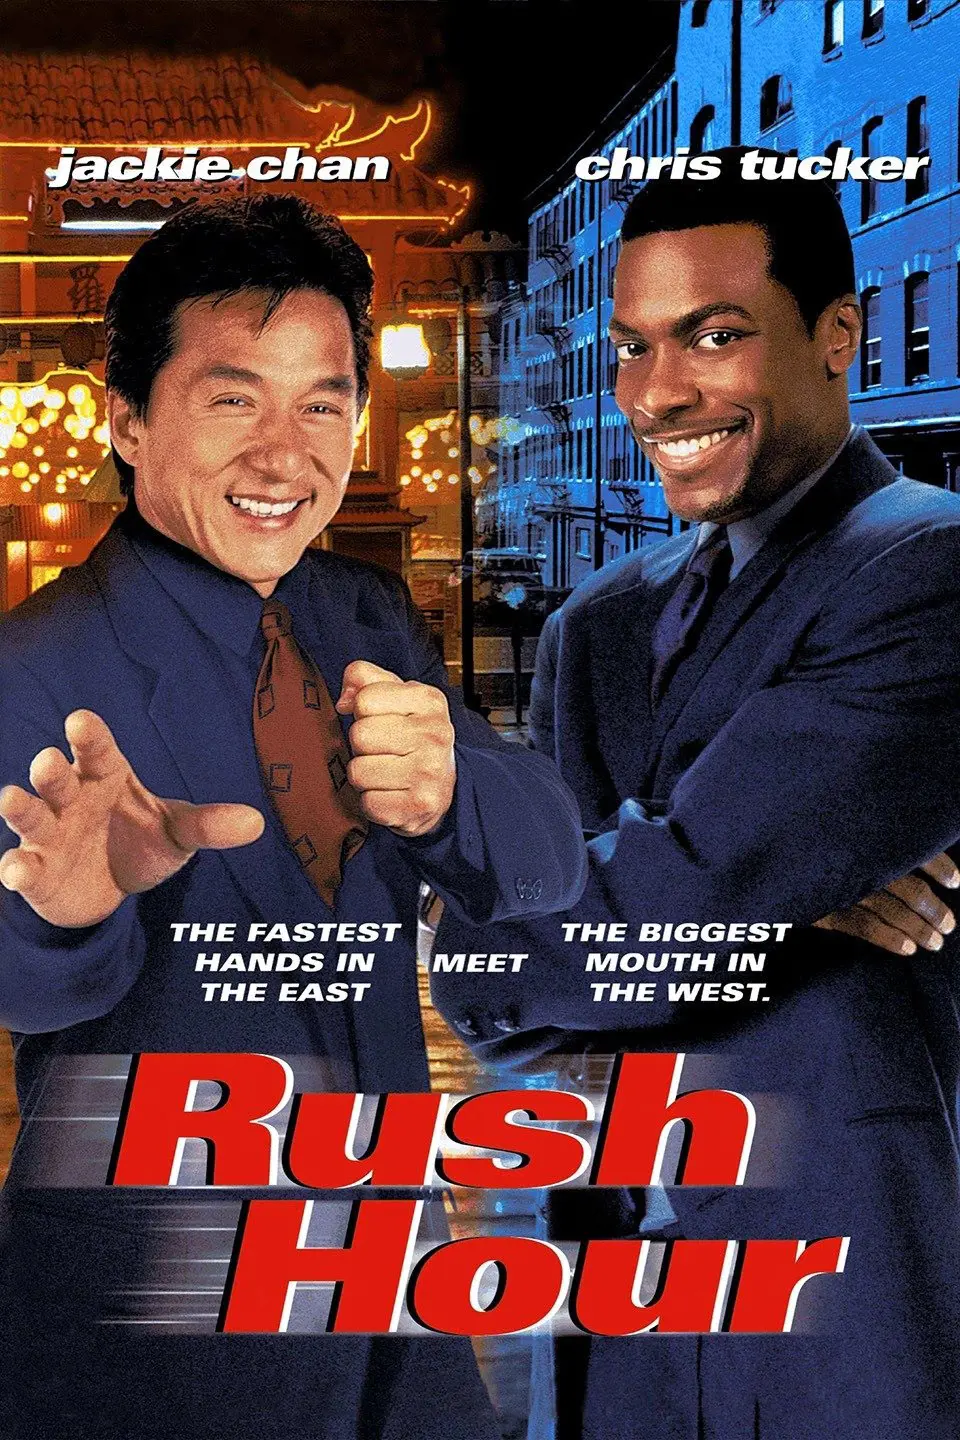 Rush Hour is an exciting action humorous picturing starring Jackie Chan